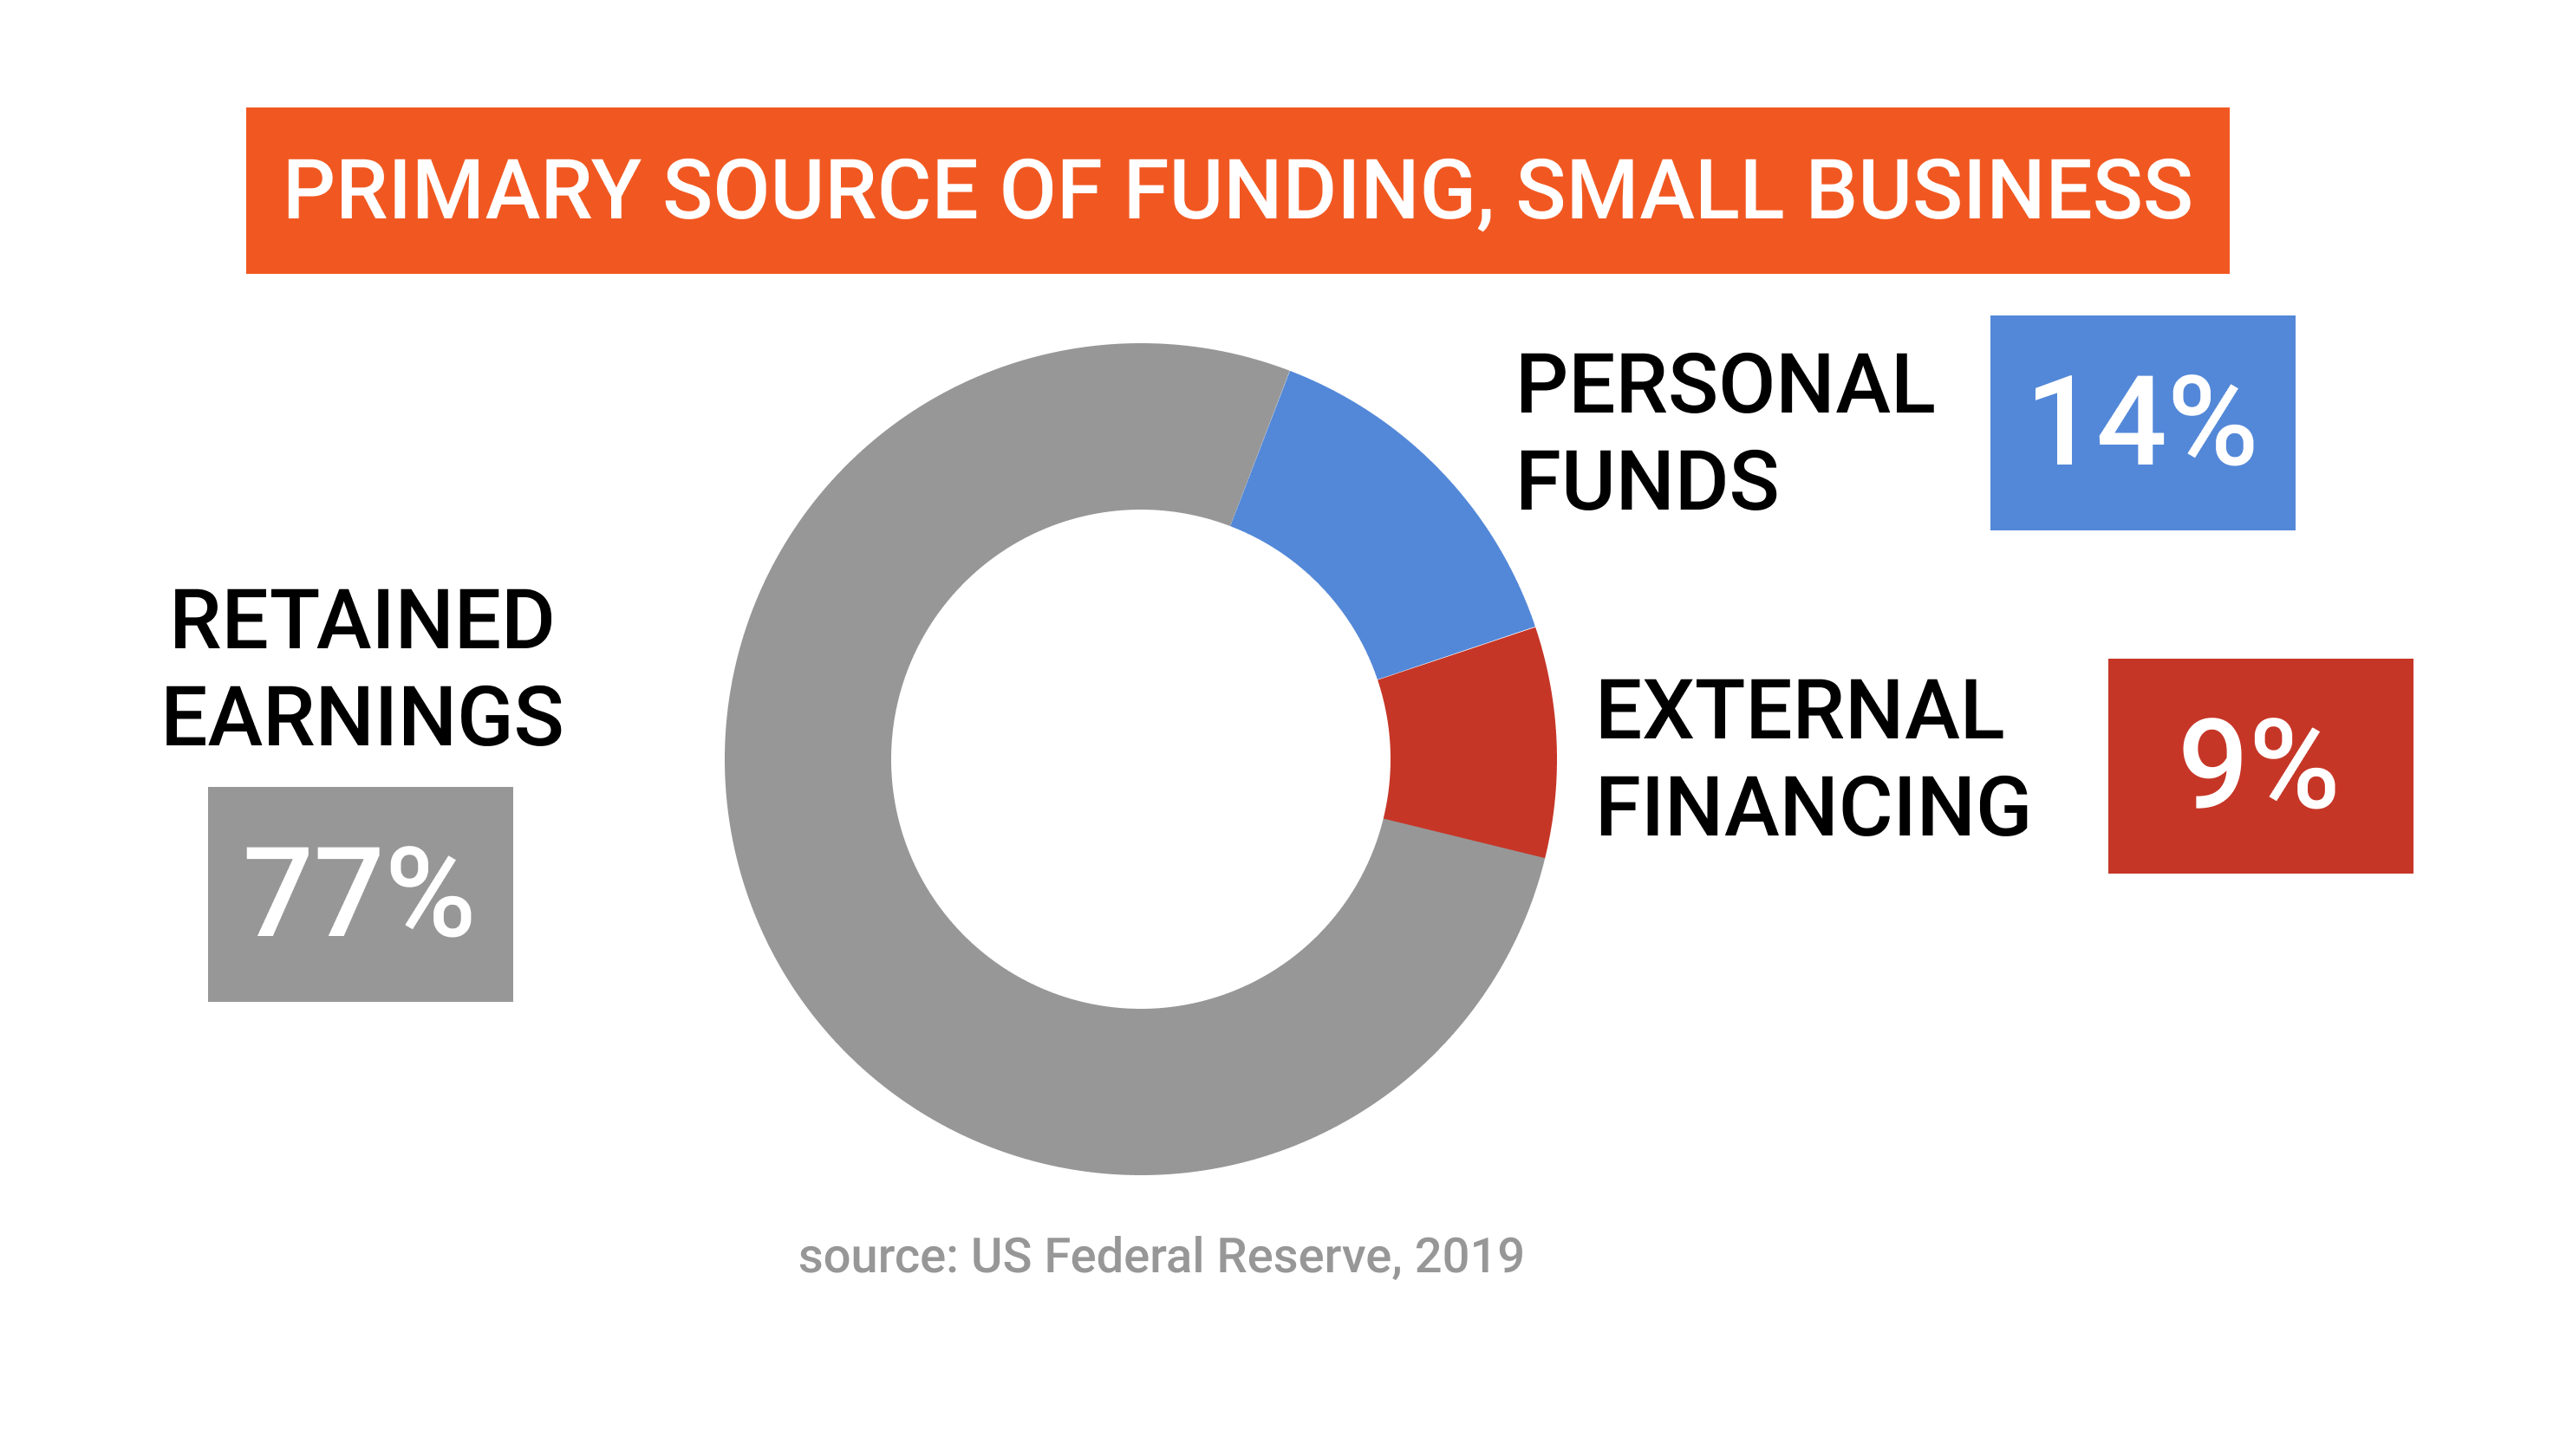 Small Businesses have very limited access to external finance and banking